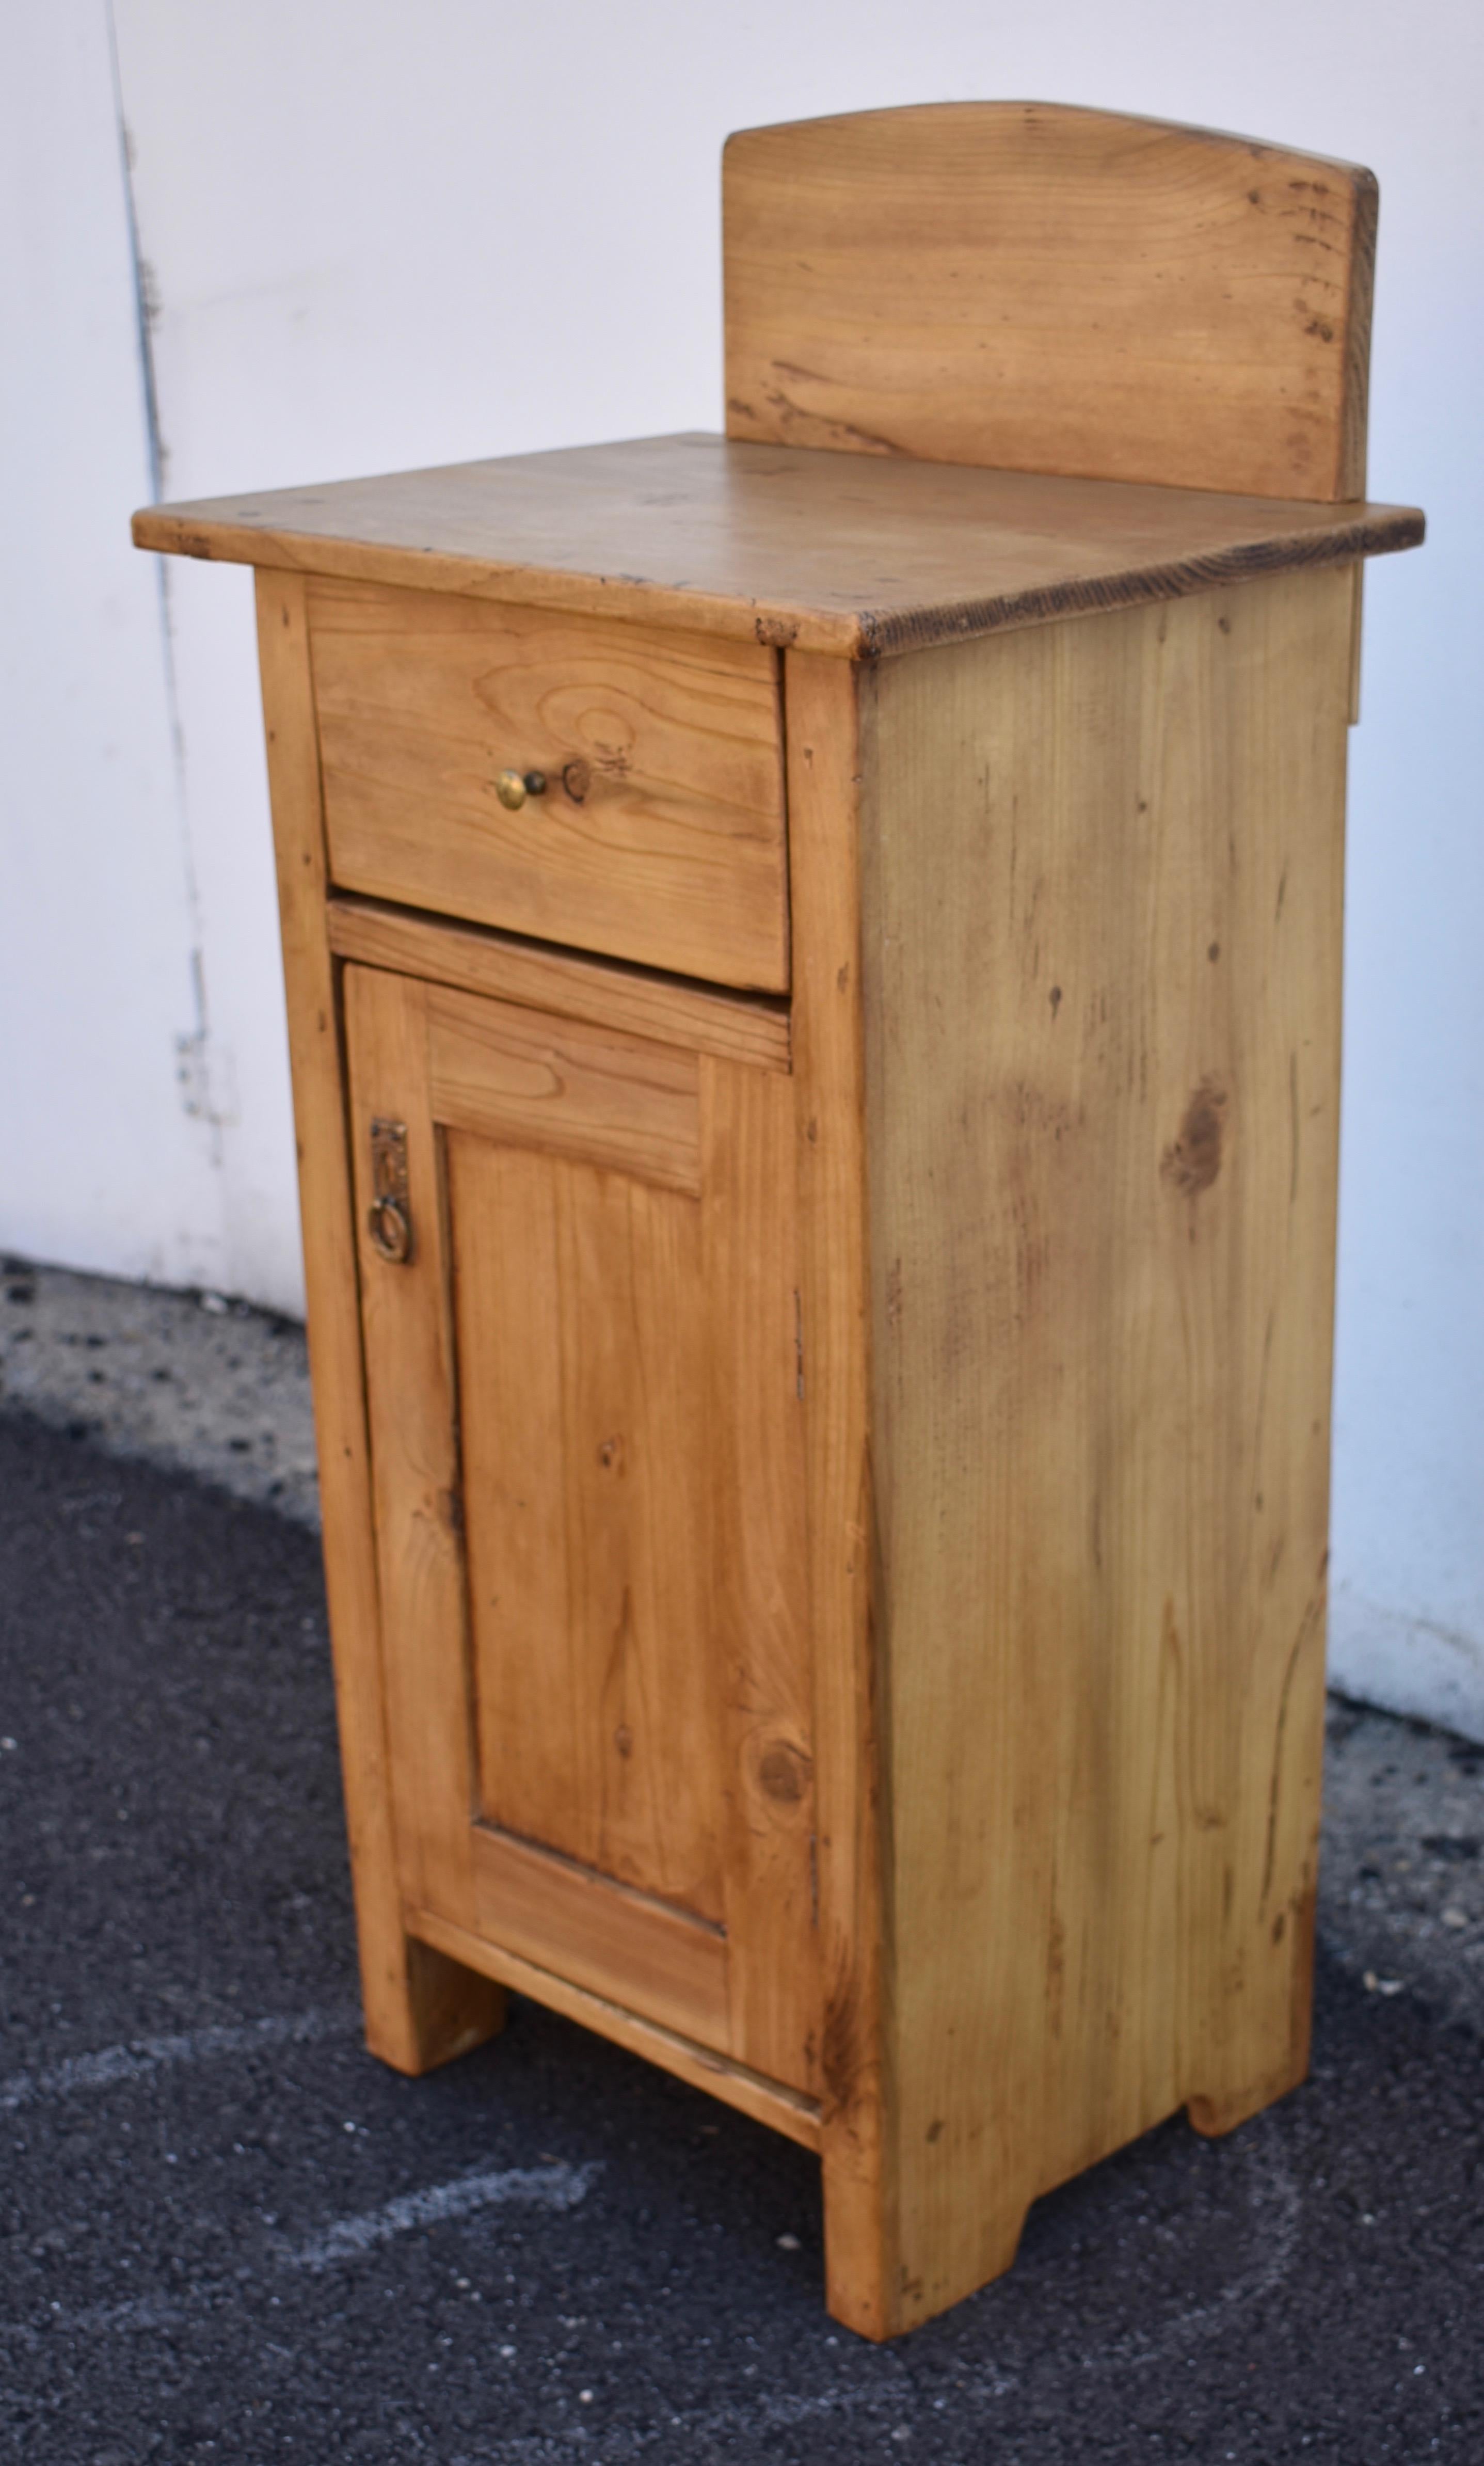 Polished Pine Nightstand with Removable Splashback For Sale